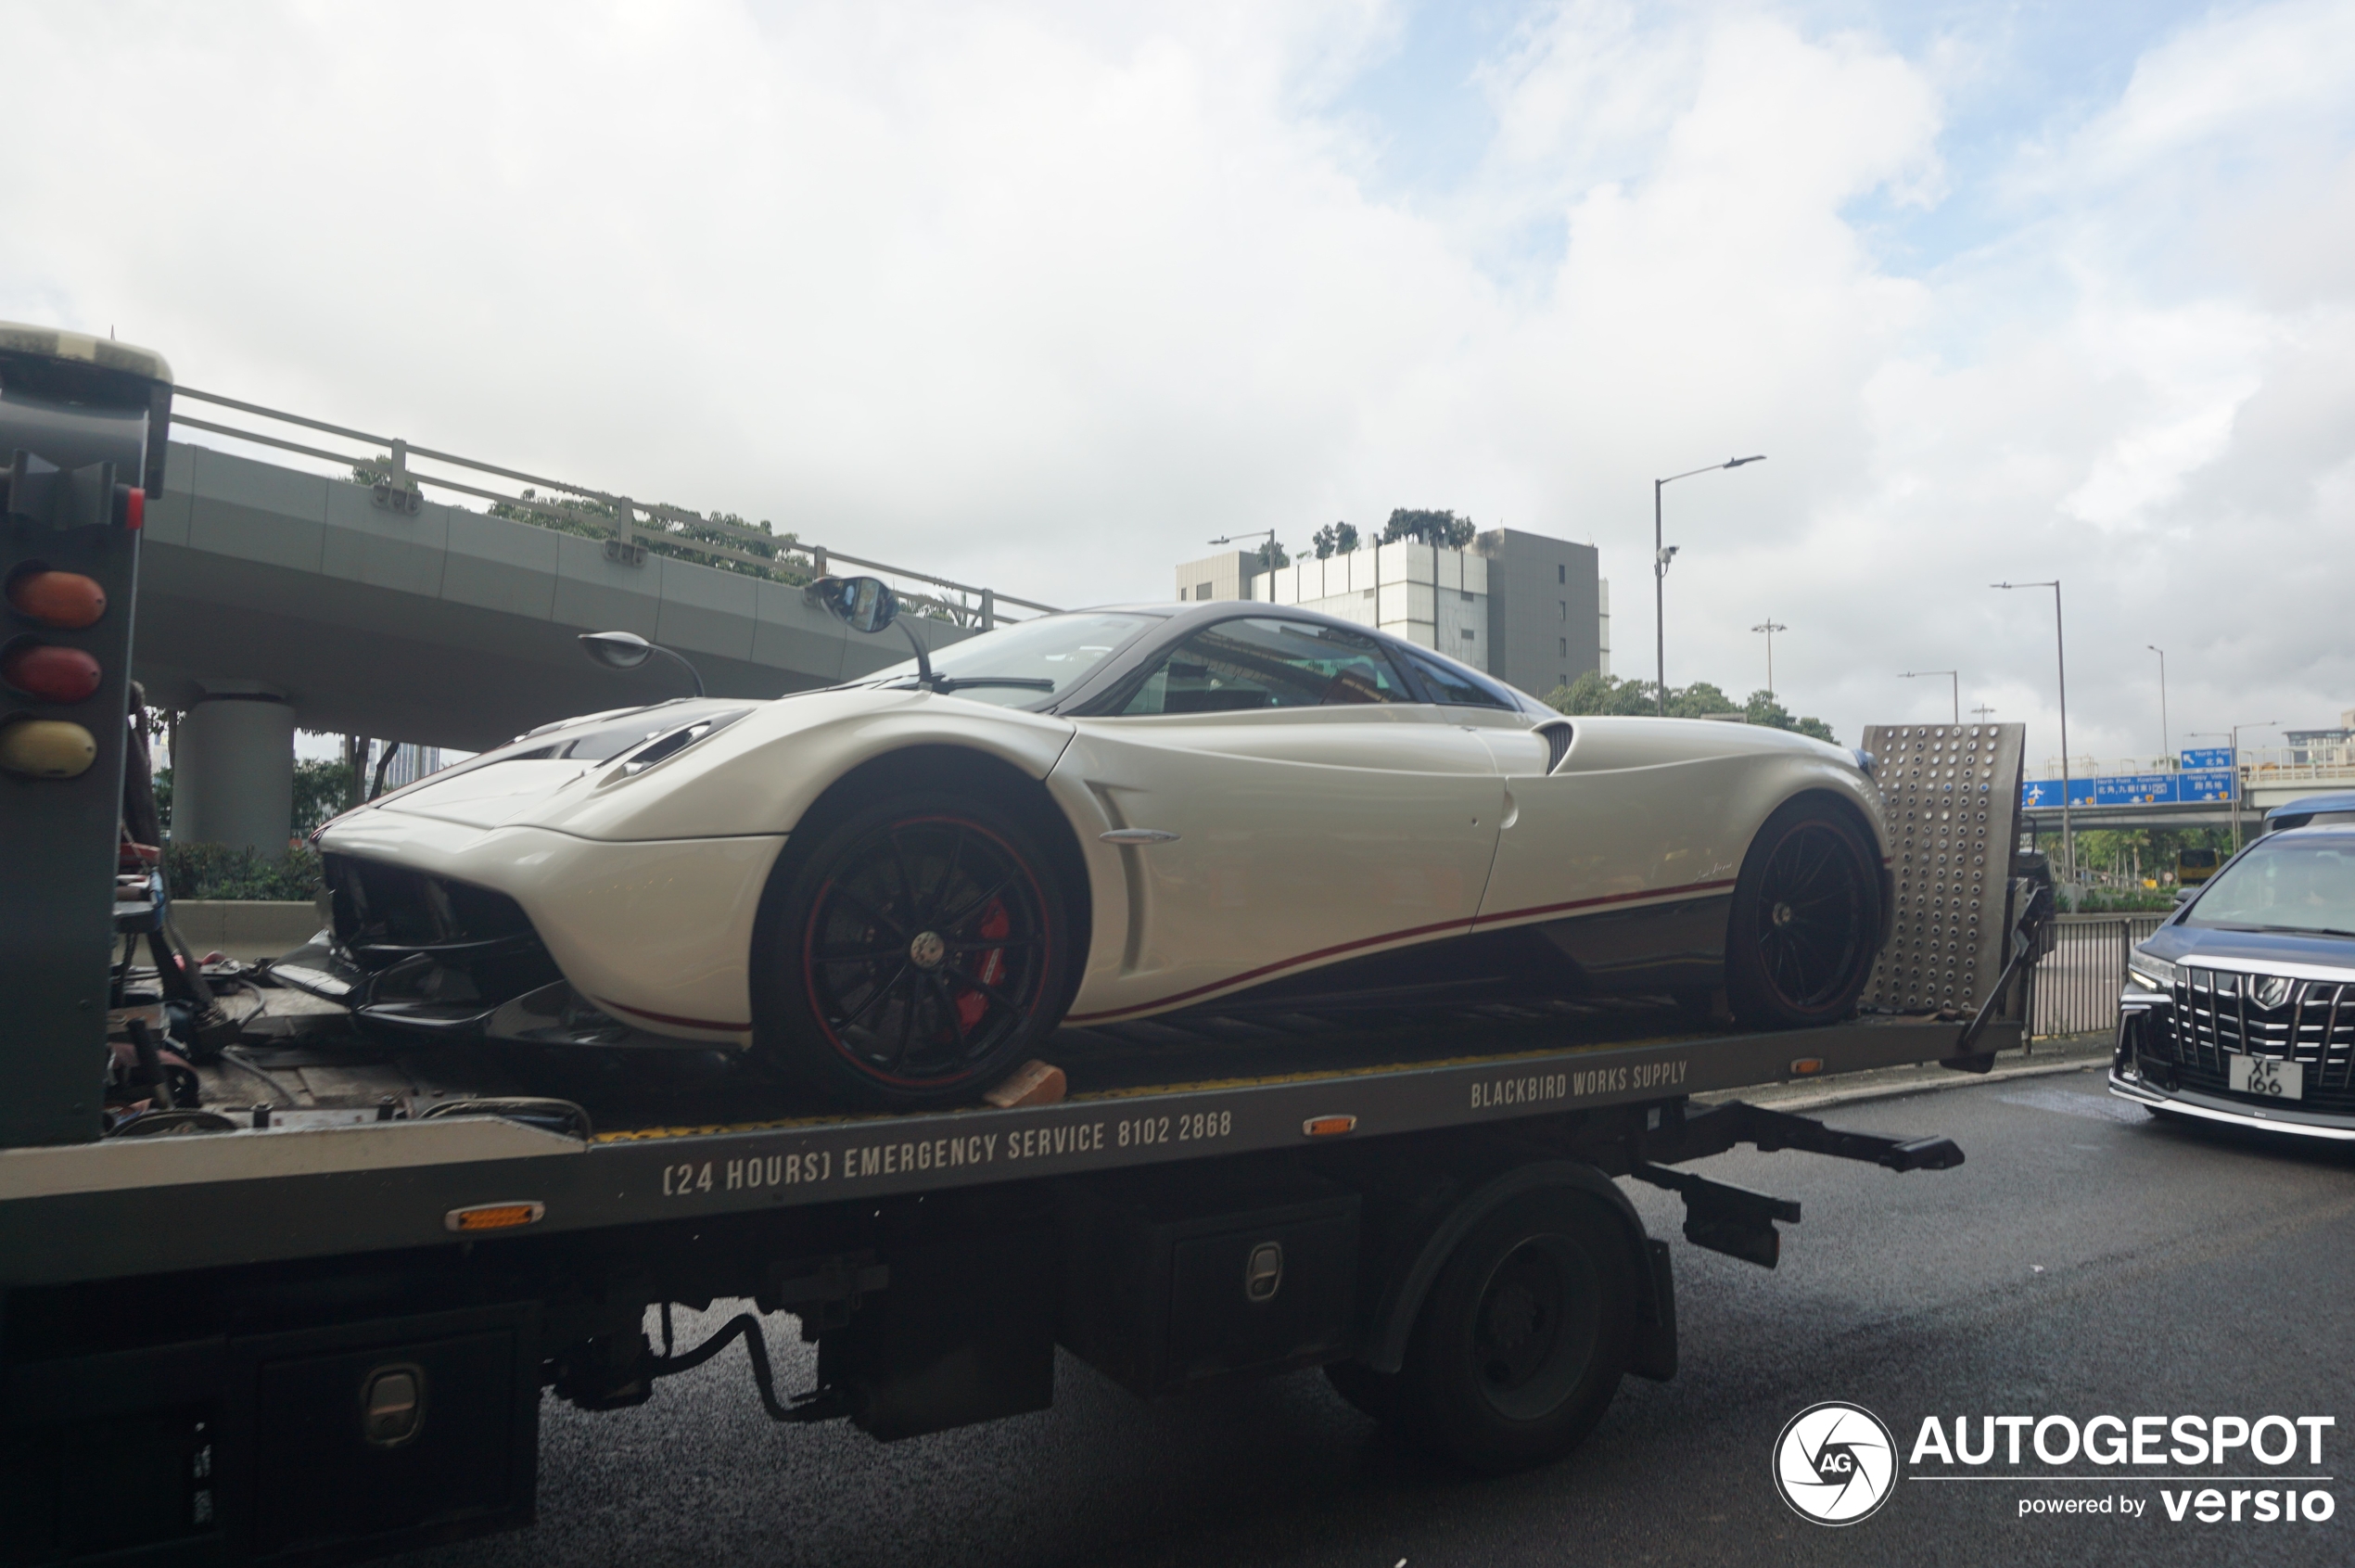 A beautiful Huayra Pacchetto Tempesta shows up in Toronto